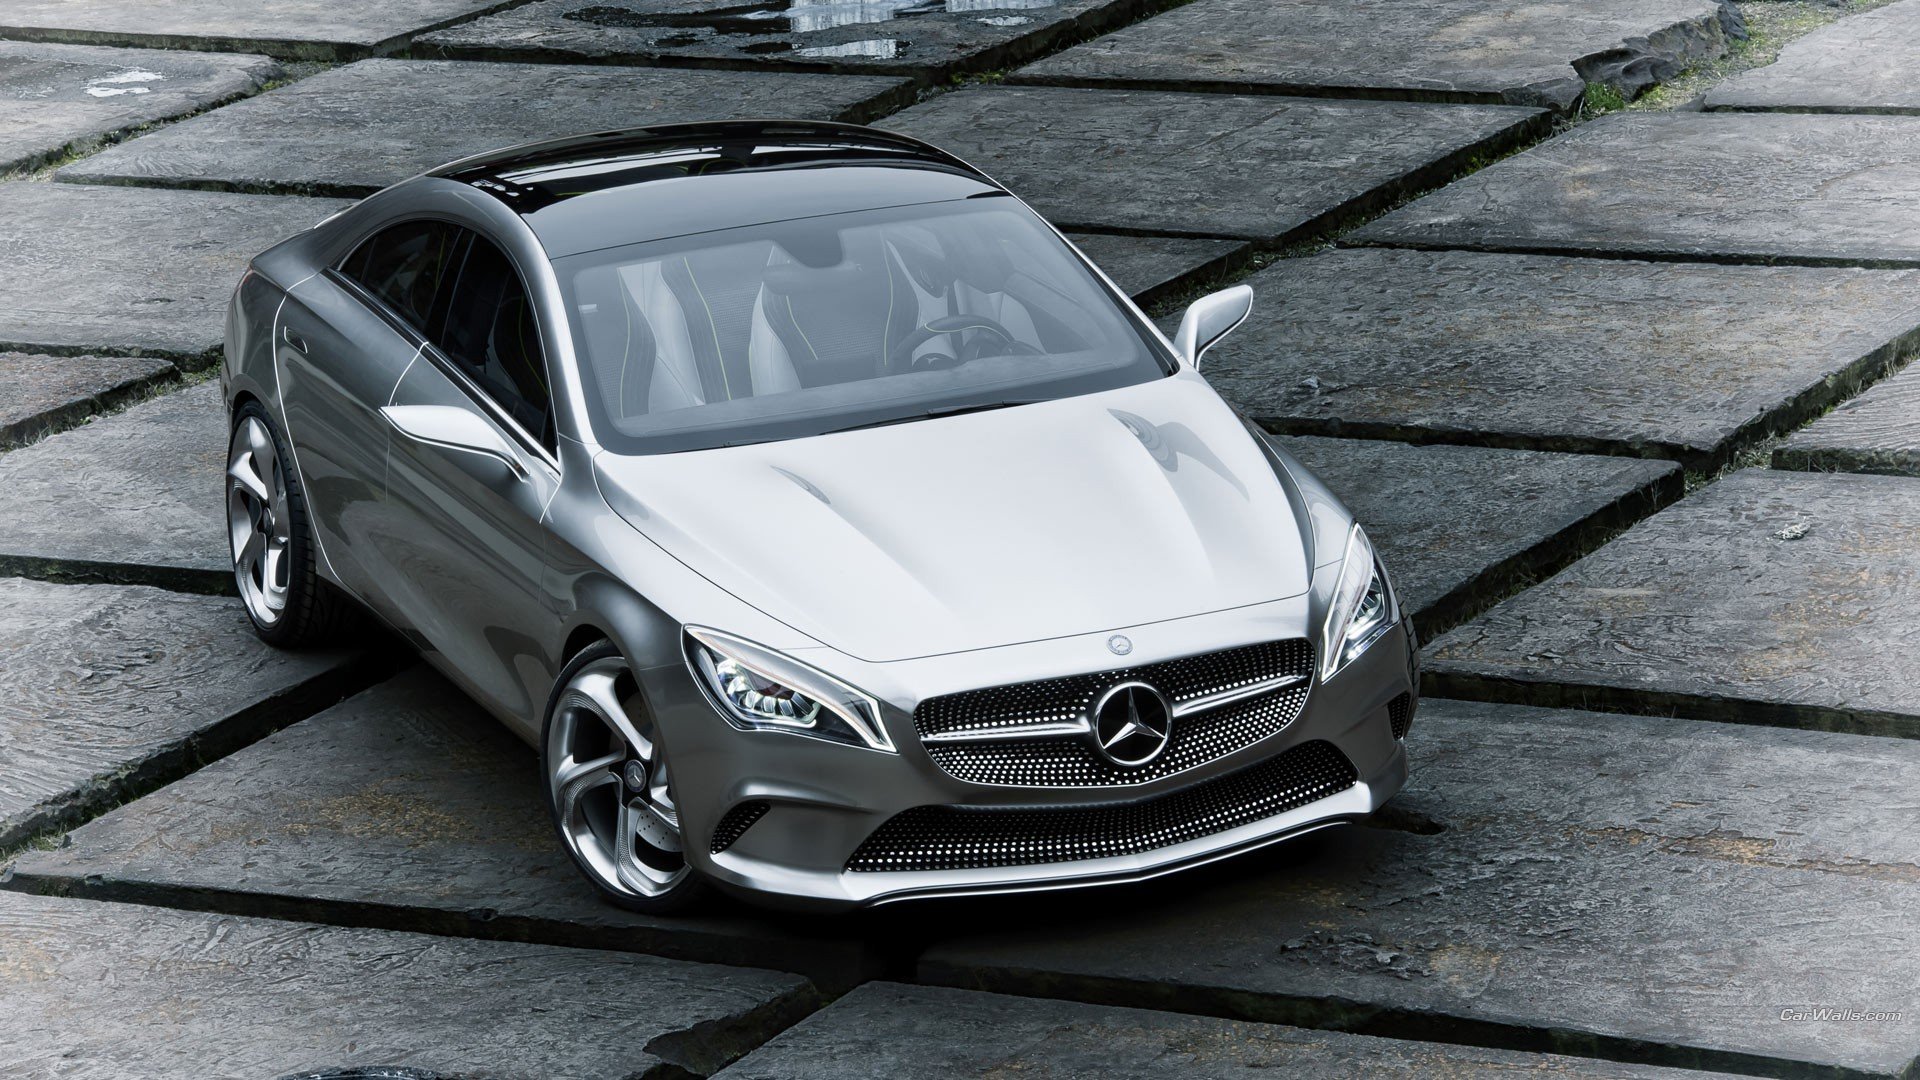 cars, Style, Coupe, Mercedes, Benz, Mercedes, Style, Coupe Wallpaper